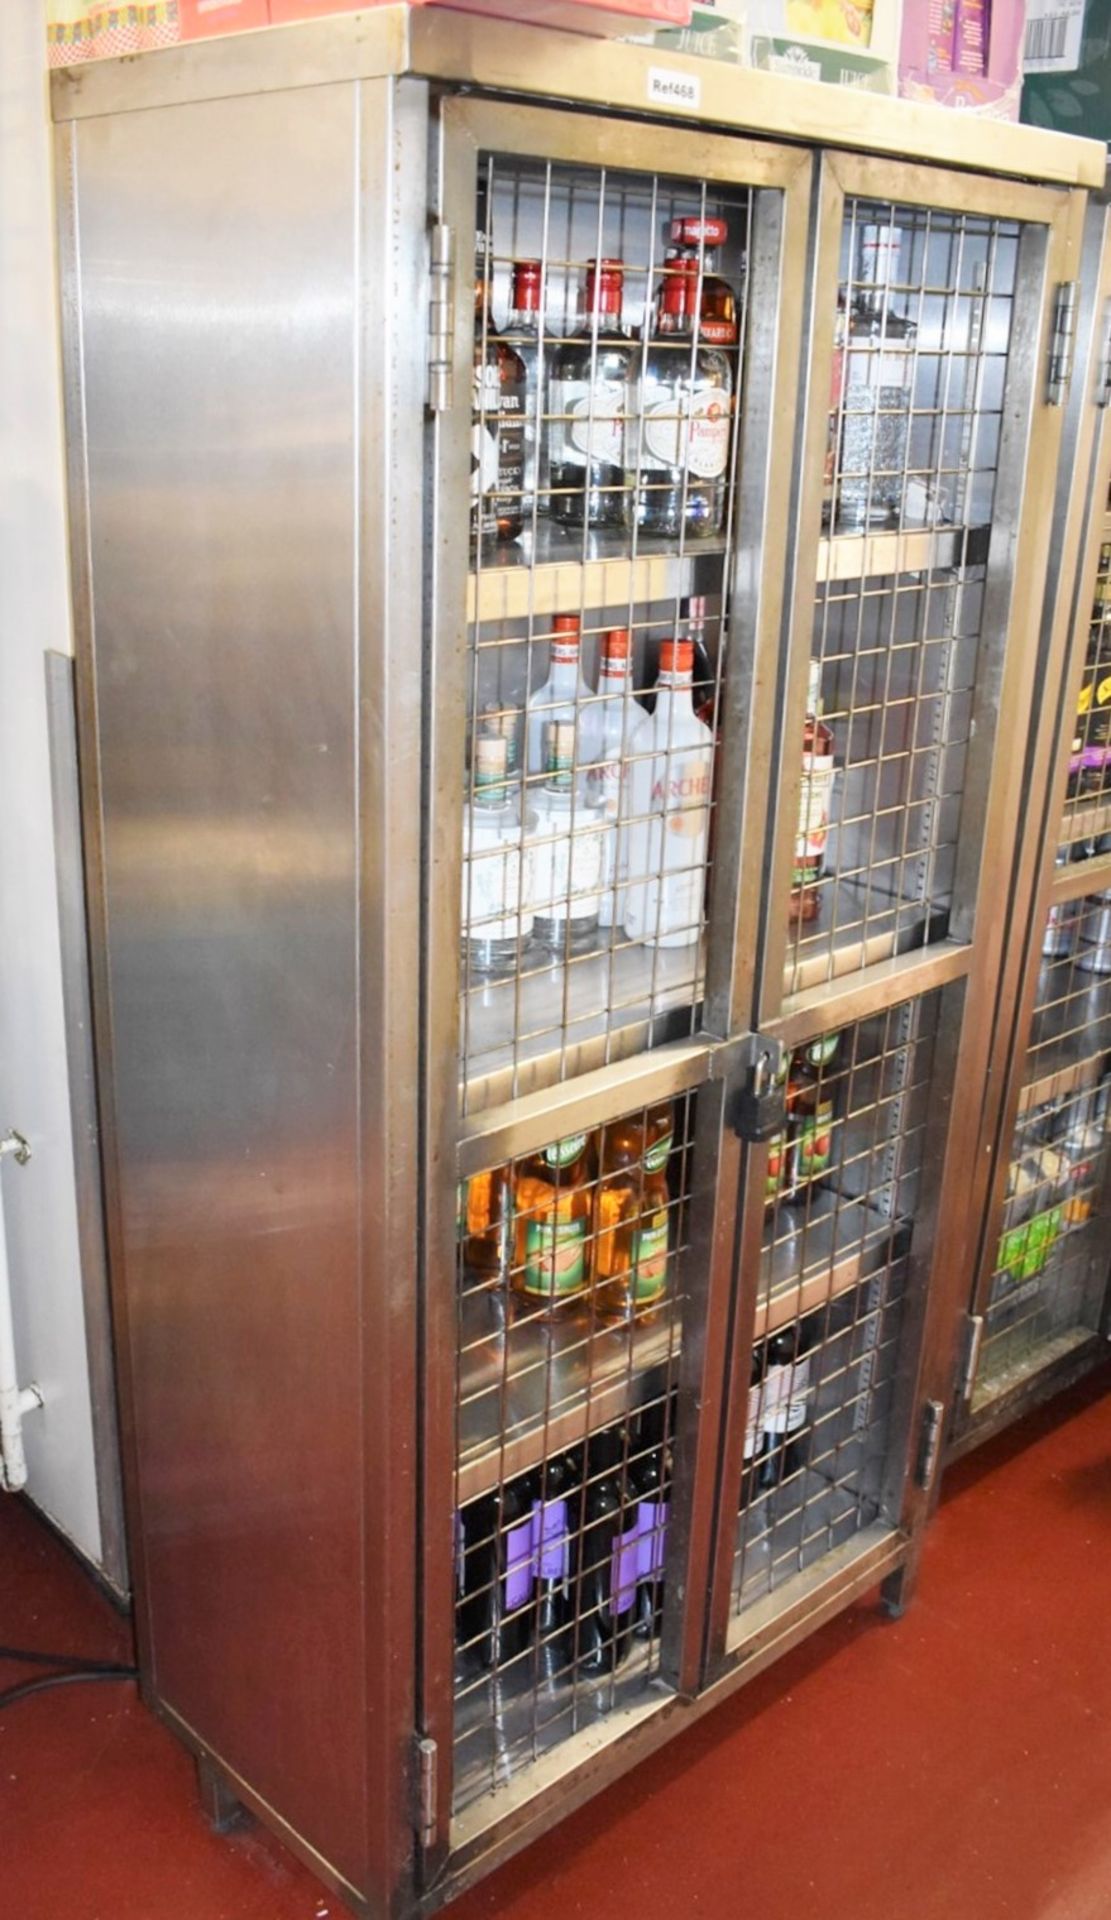 1 x Stainless Steel Security Drinks Cabinet With Caged Doors and Four Shelves - H160 x W80 x D40 cms